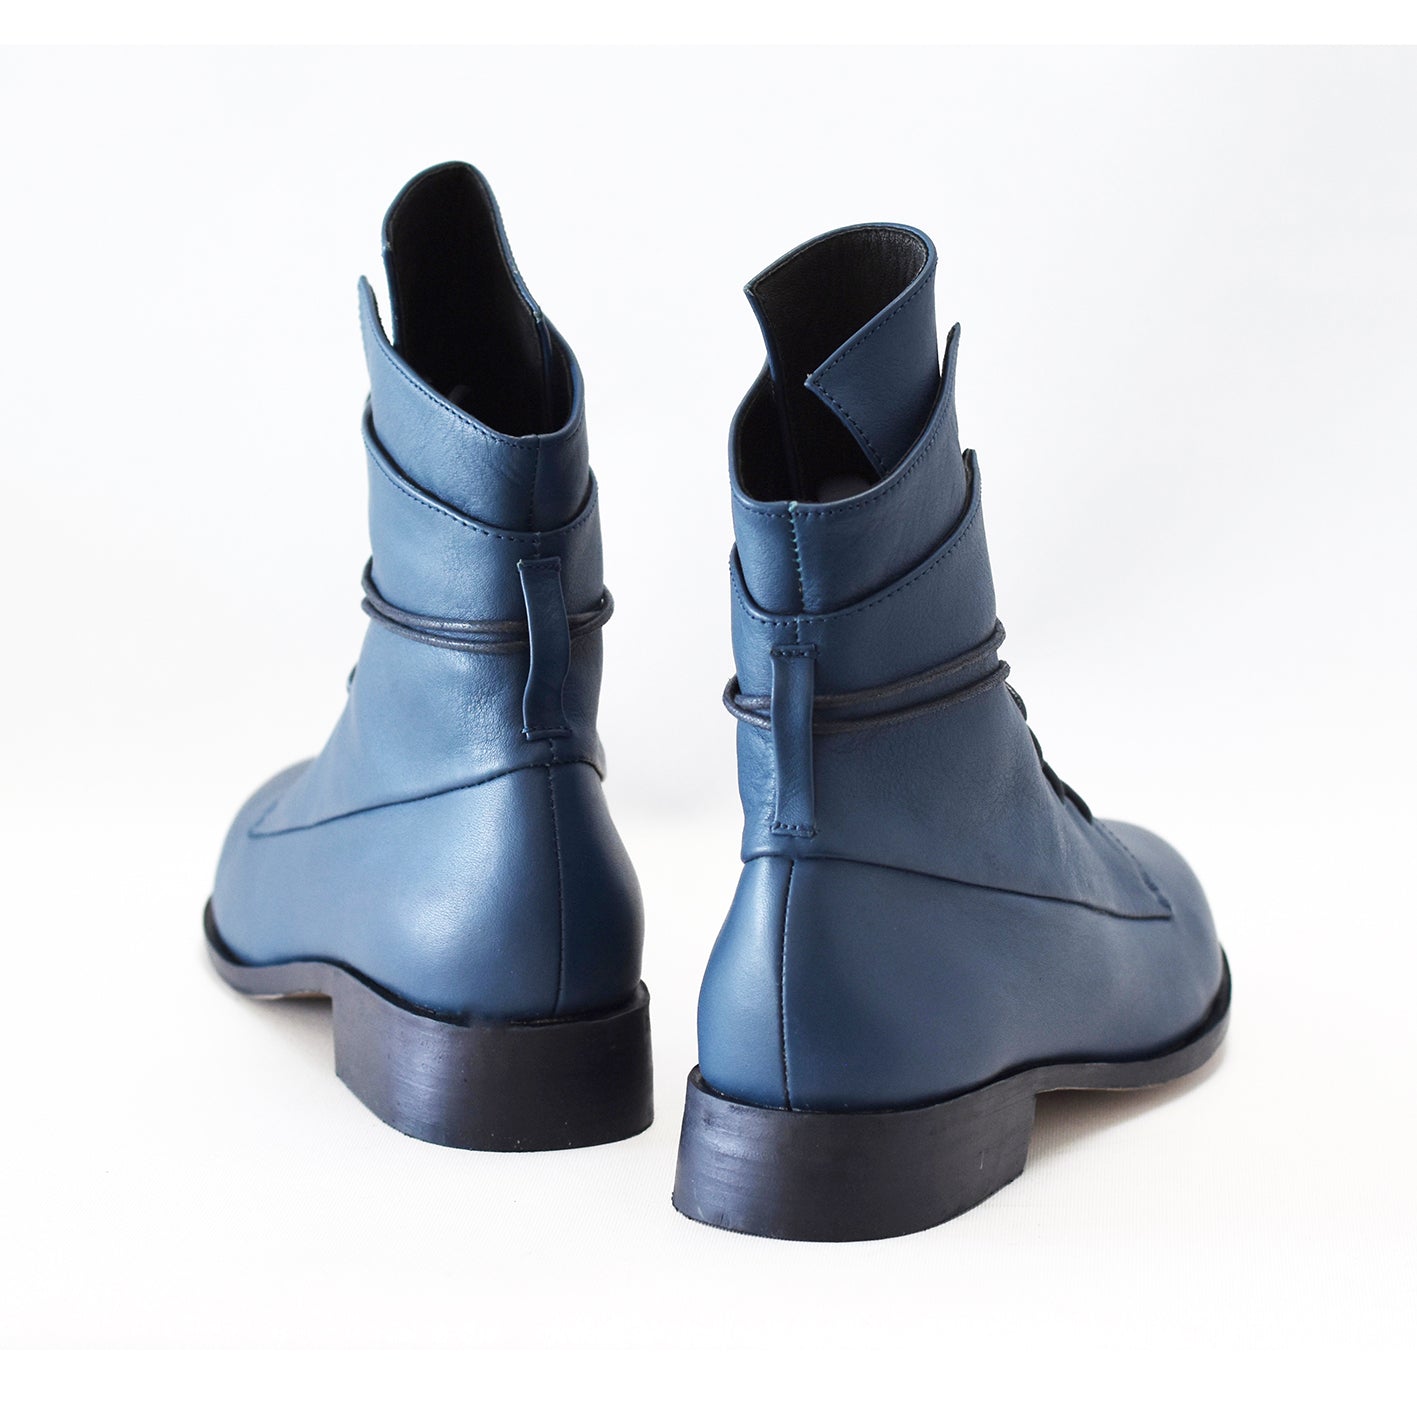 The Striker Boot Saxe Blue, Perfect heel height for comfort